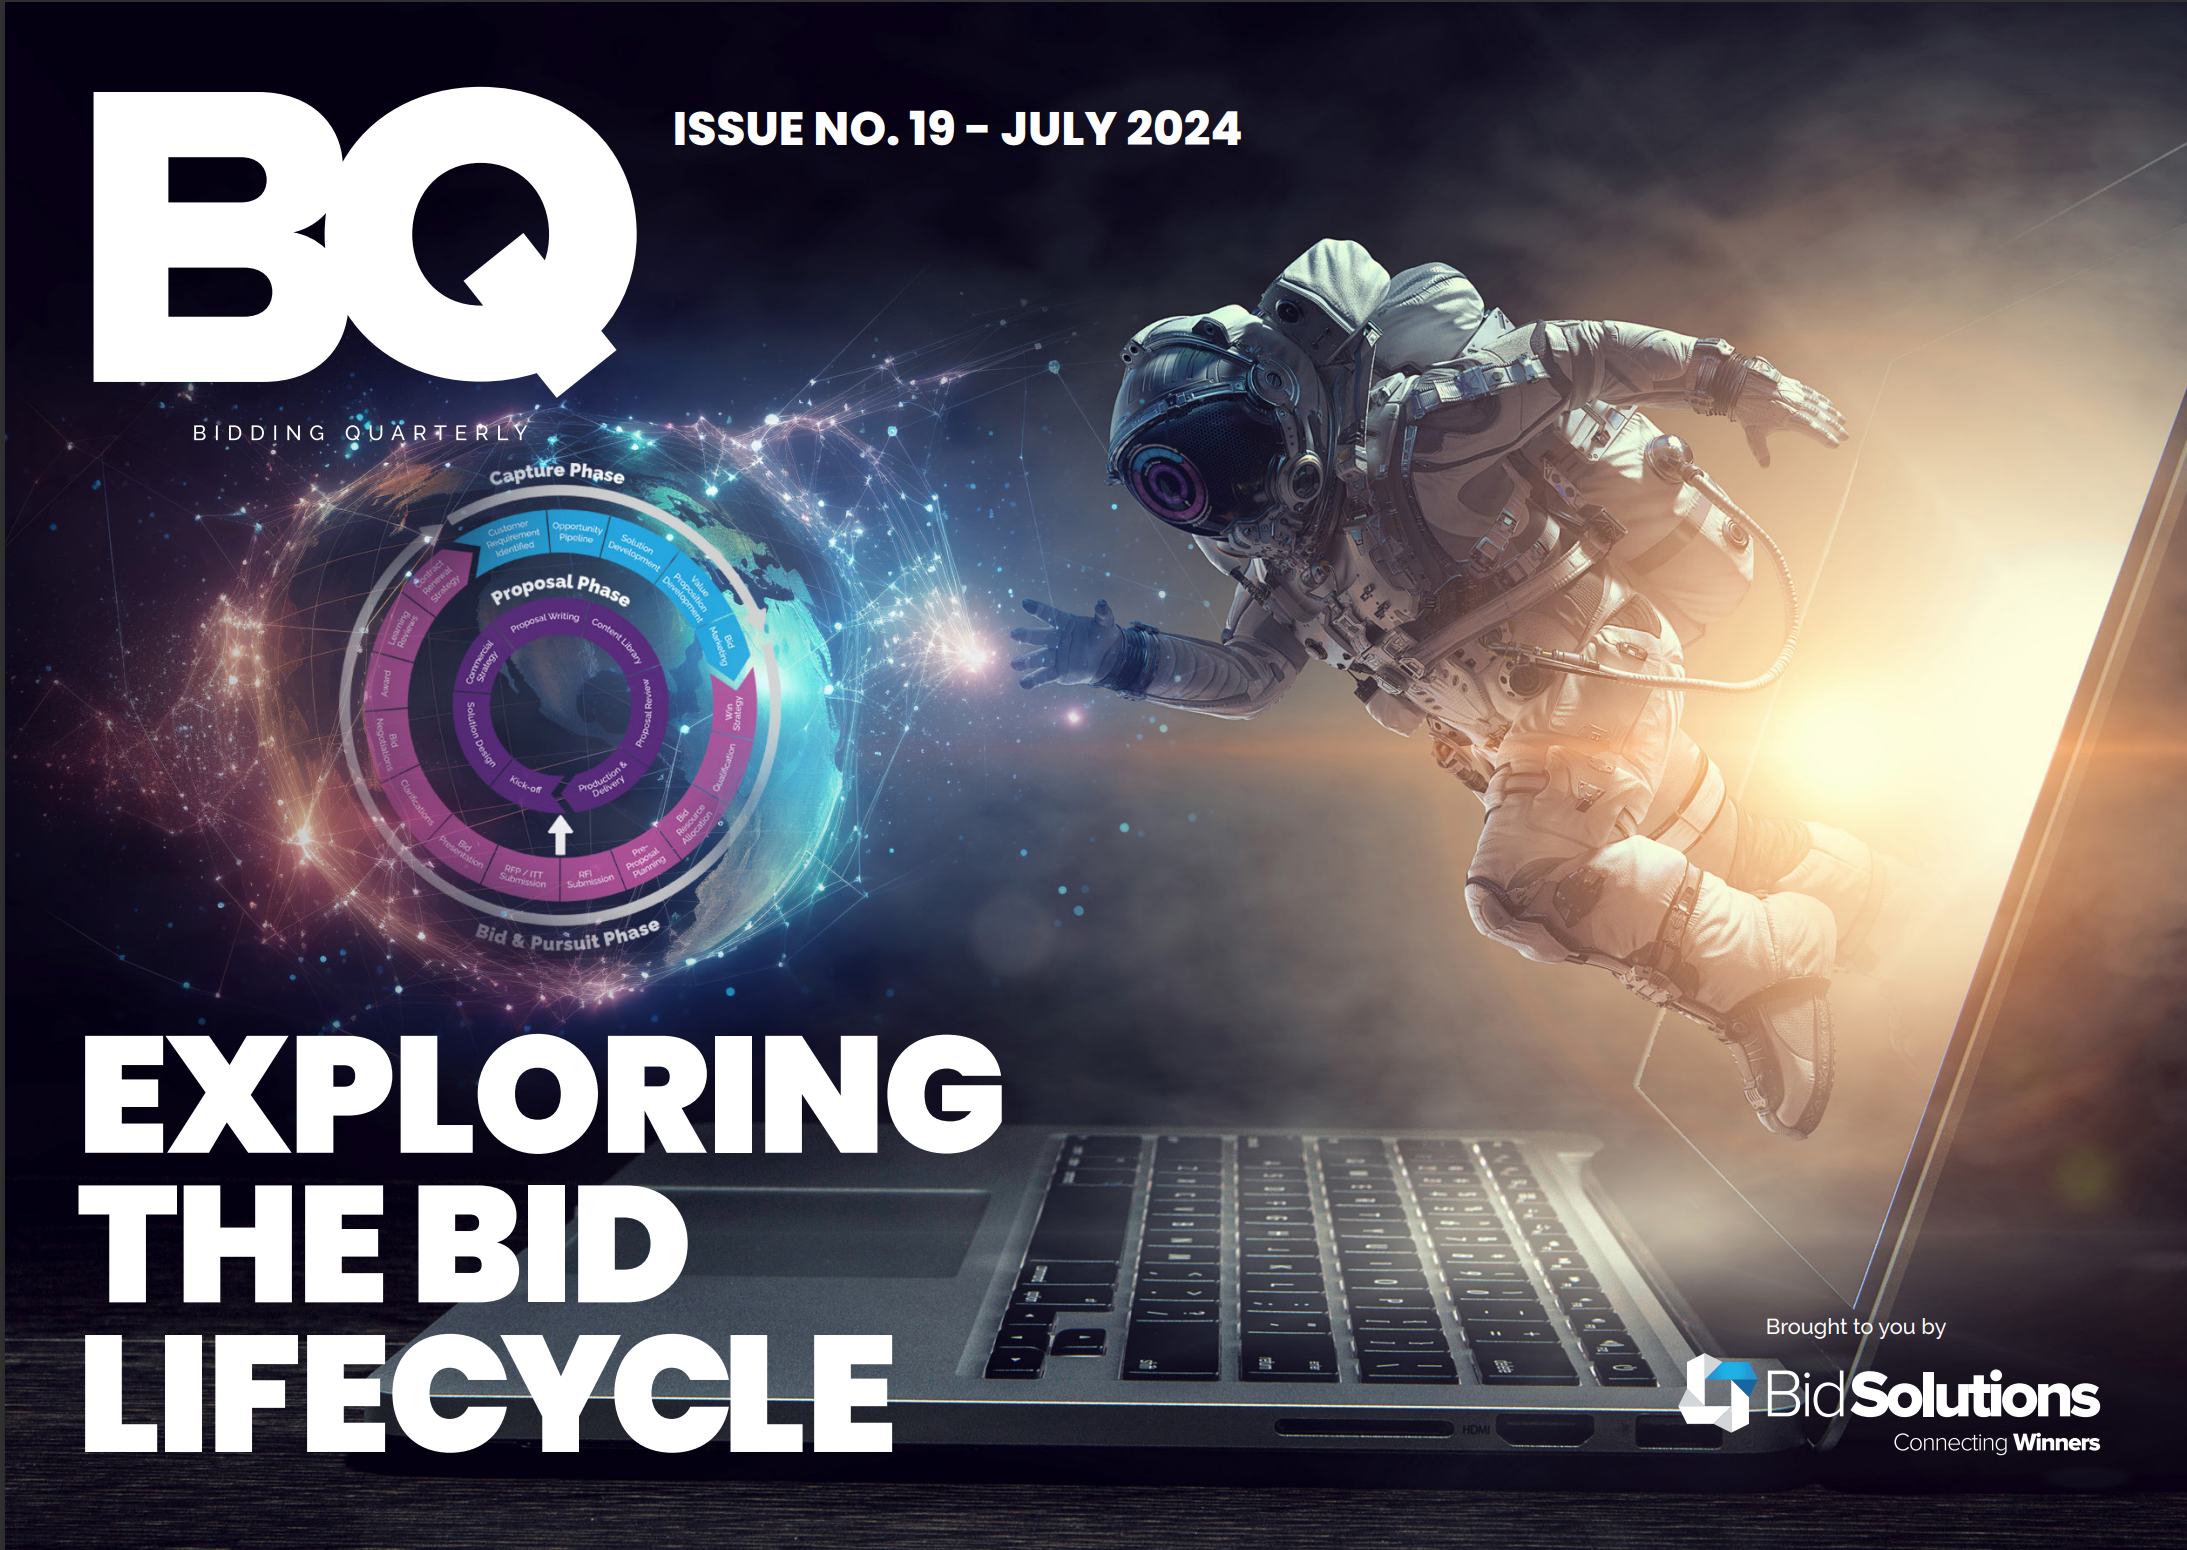 Issue 19 - Exploring The Bid Lifecycle